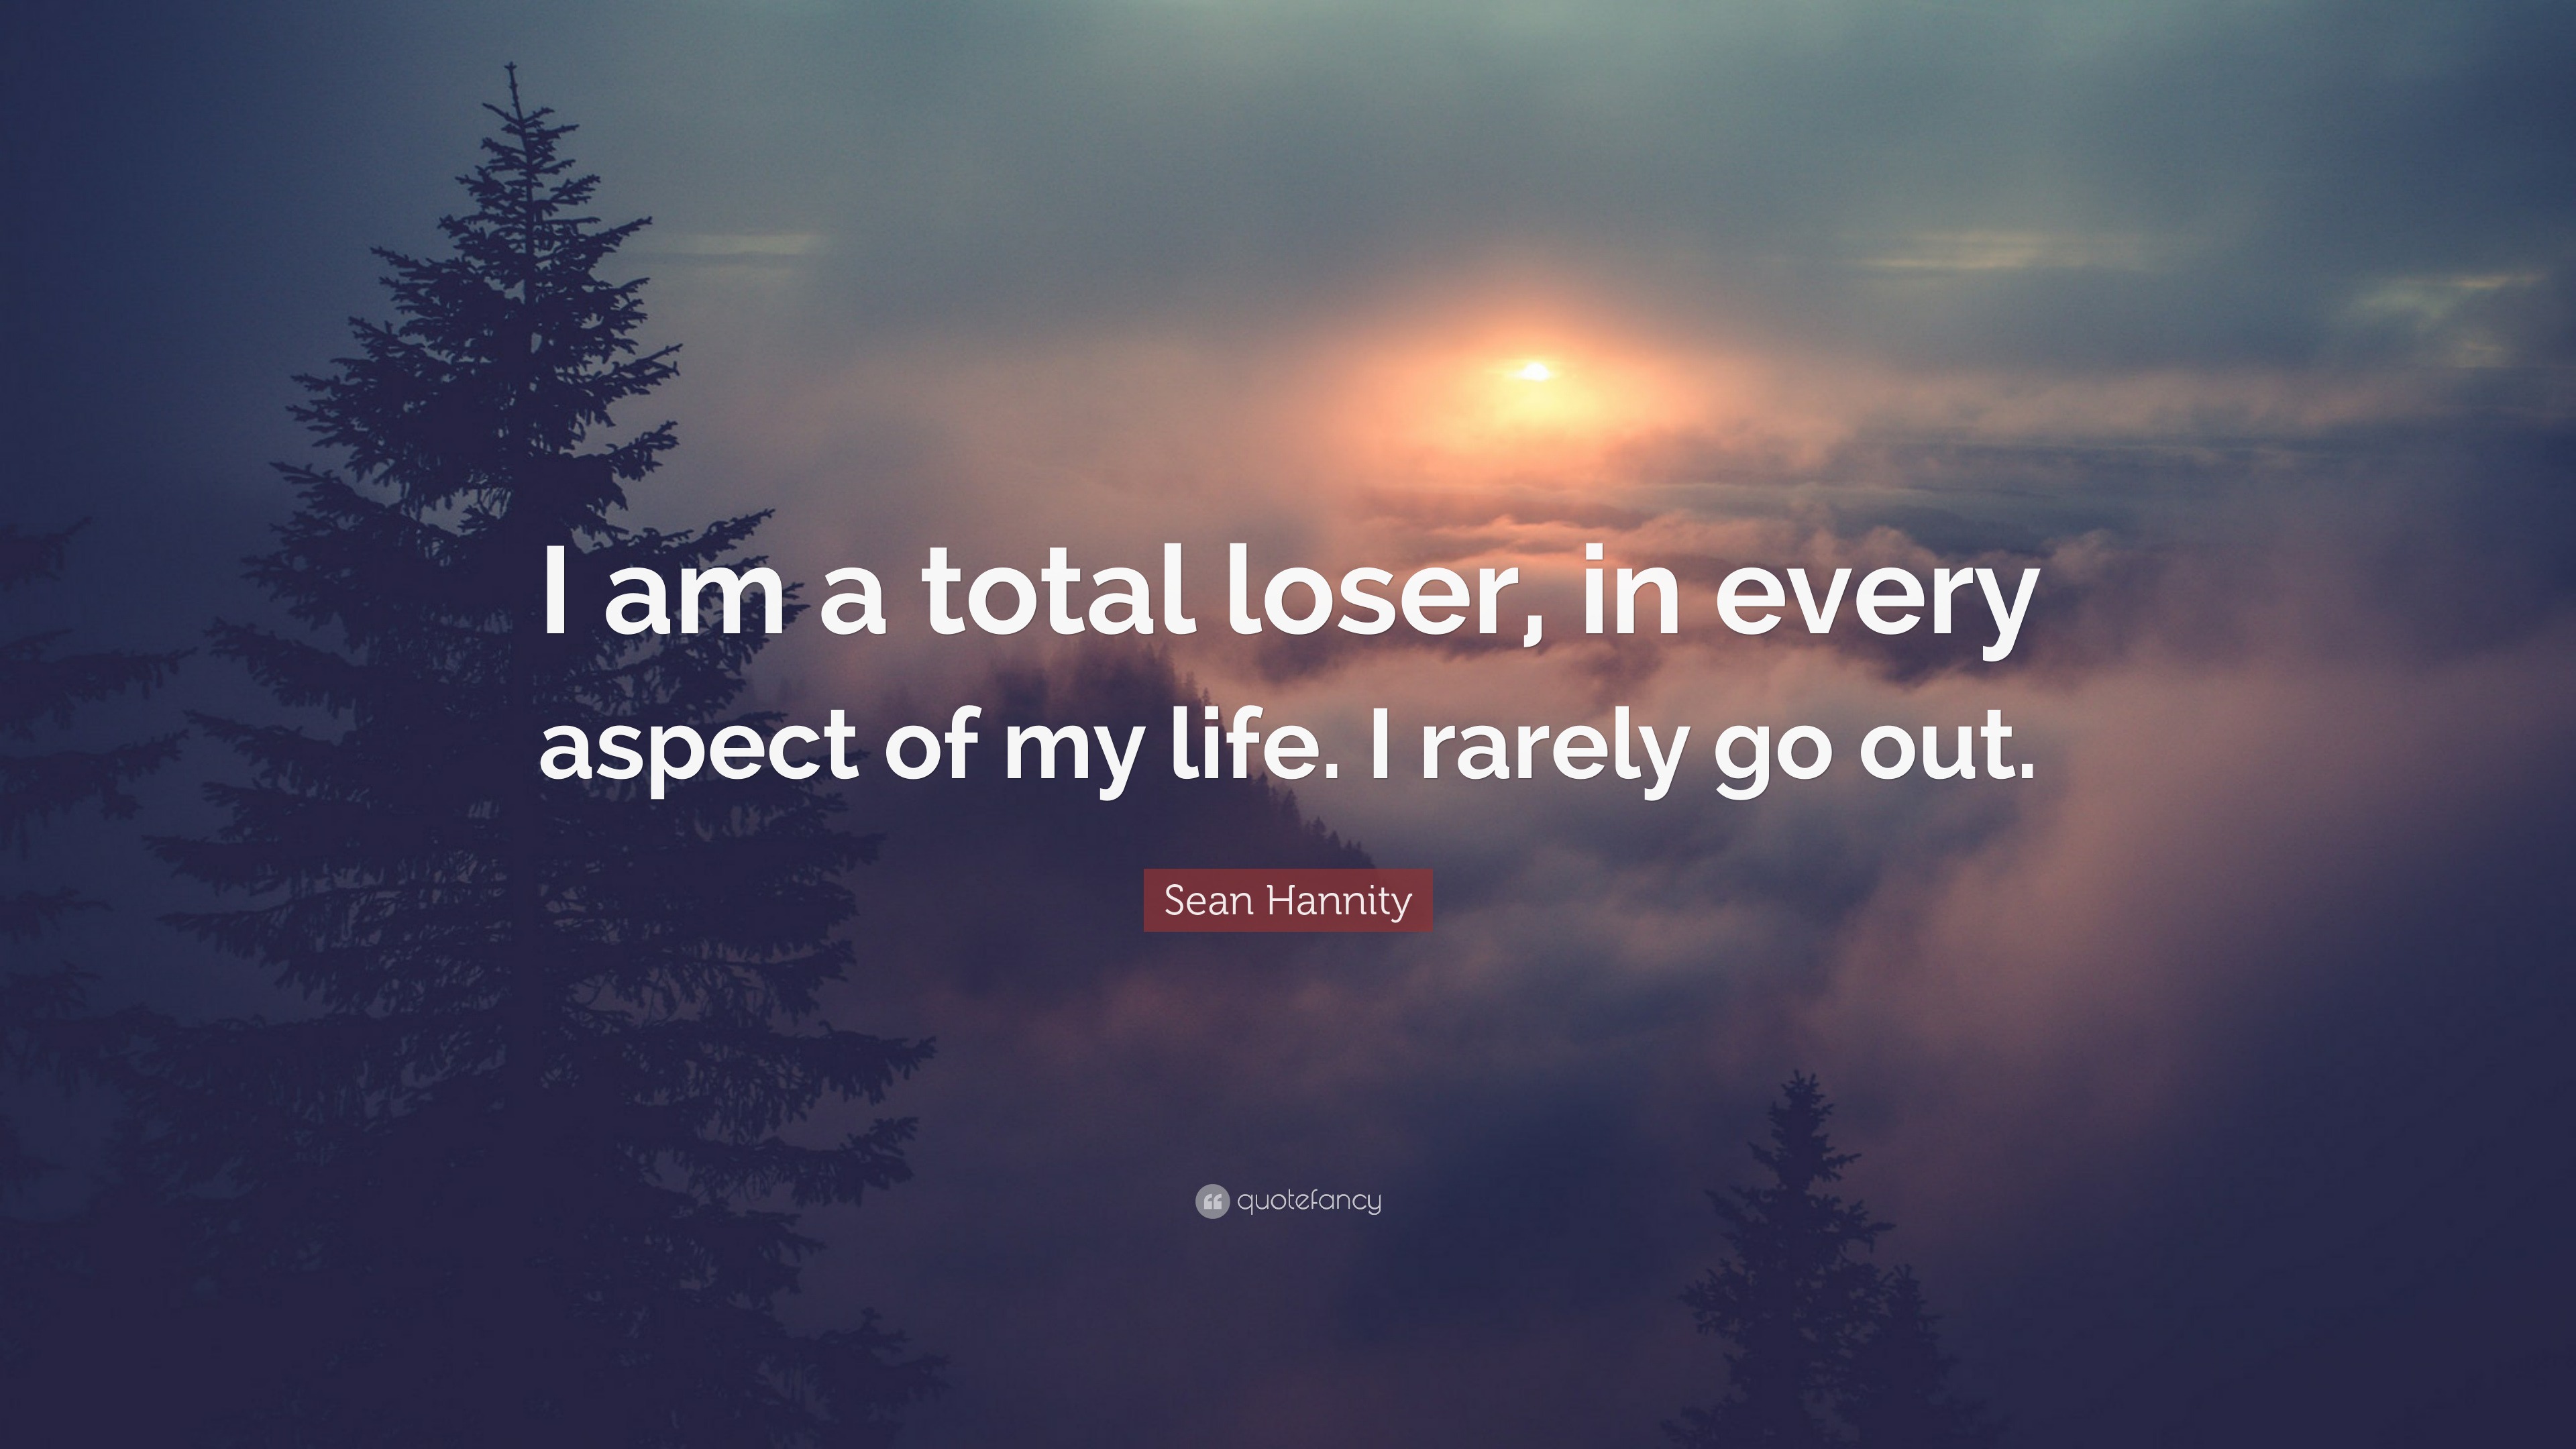 Sean Hannity Quote: “I am a total loser, in every aspect of my life. I  rarely